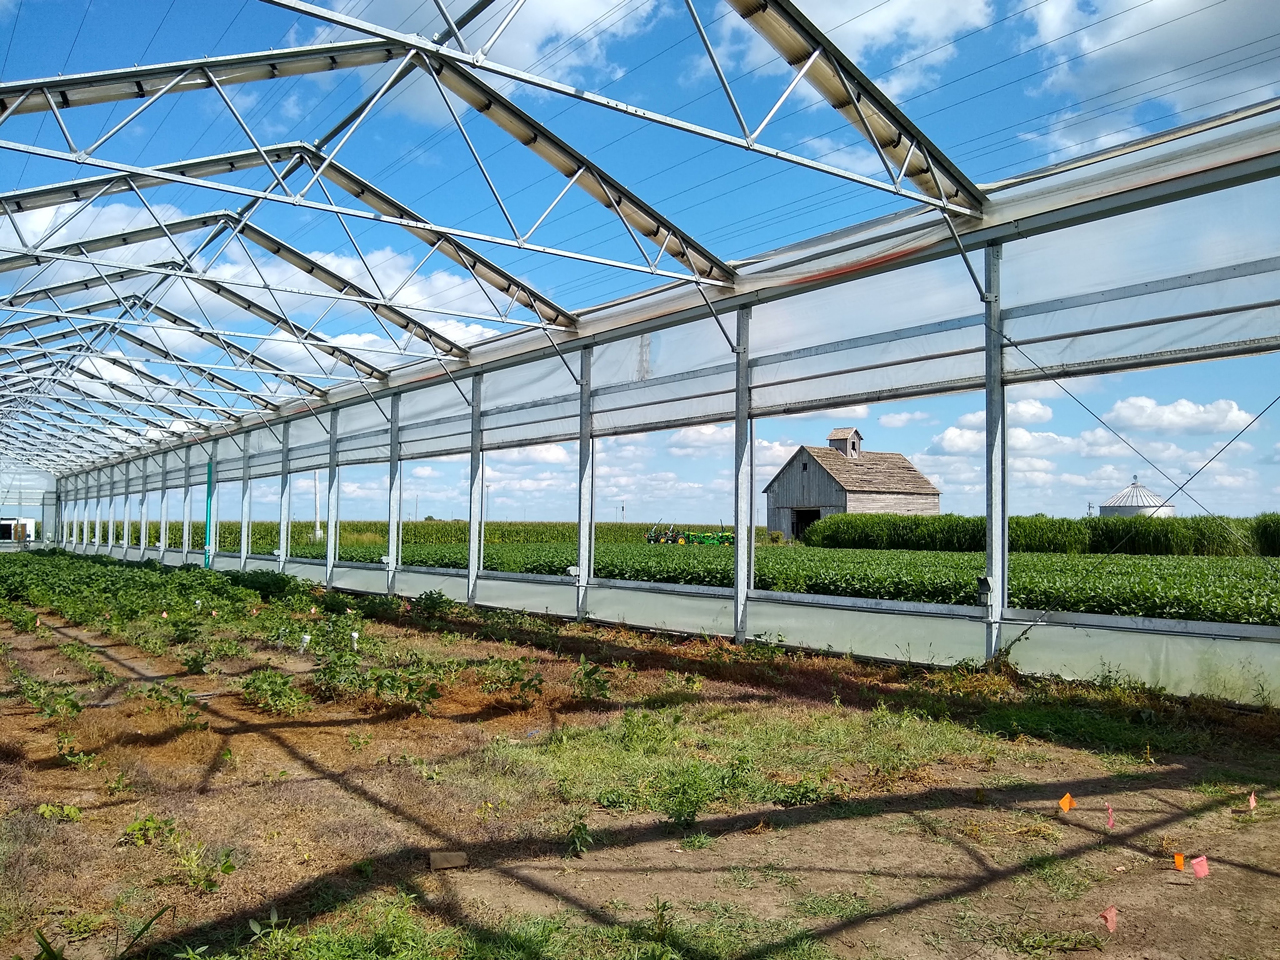 crops in greenhouse